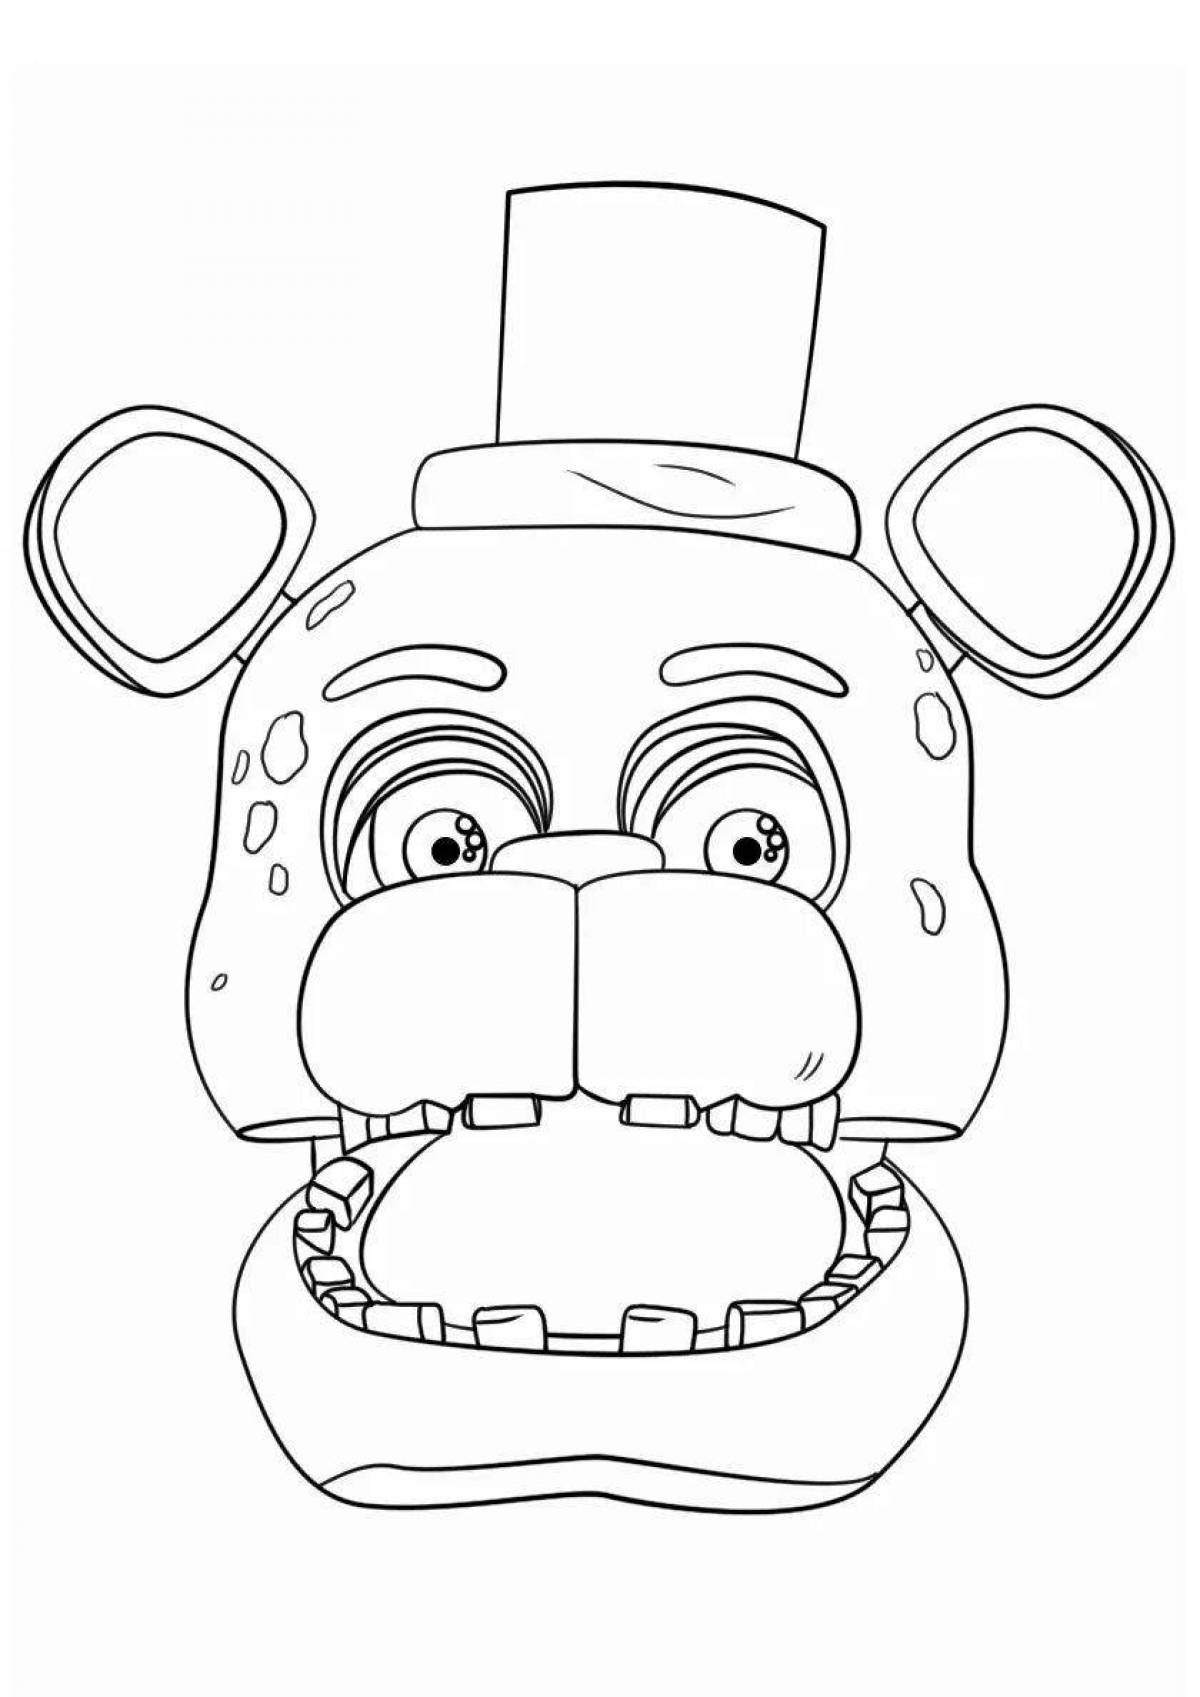 Colorful amanitronics coloring page